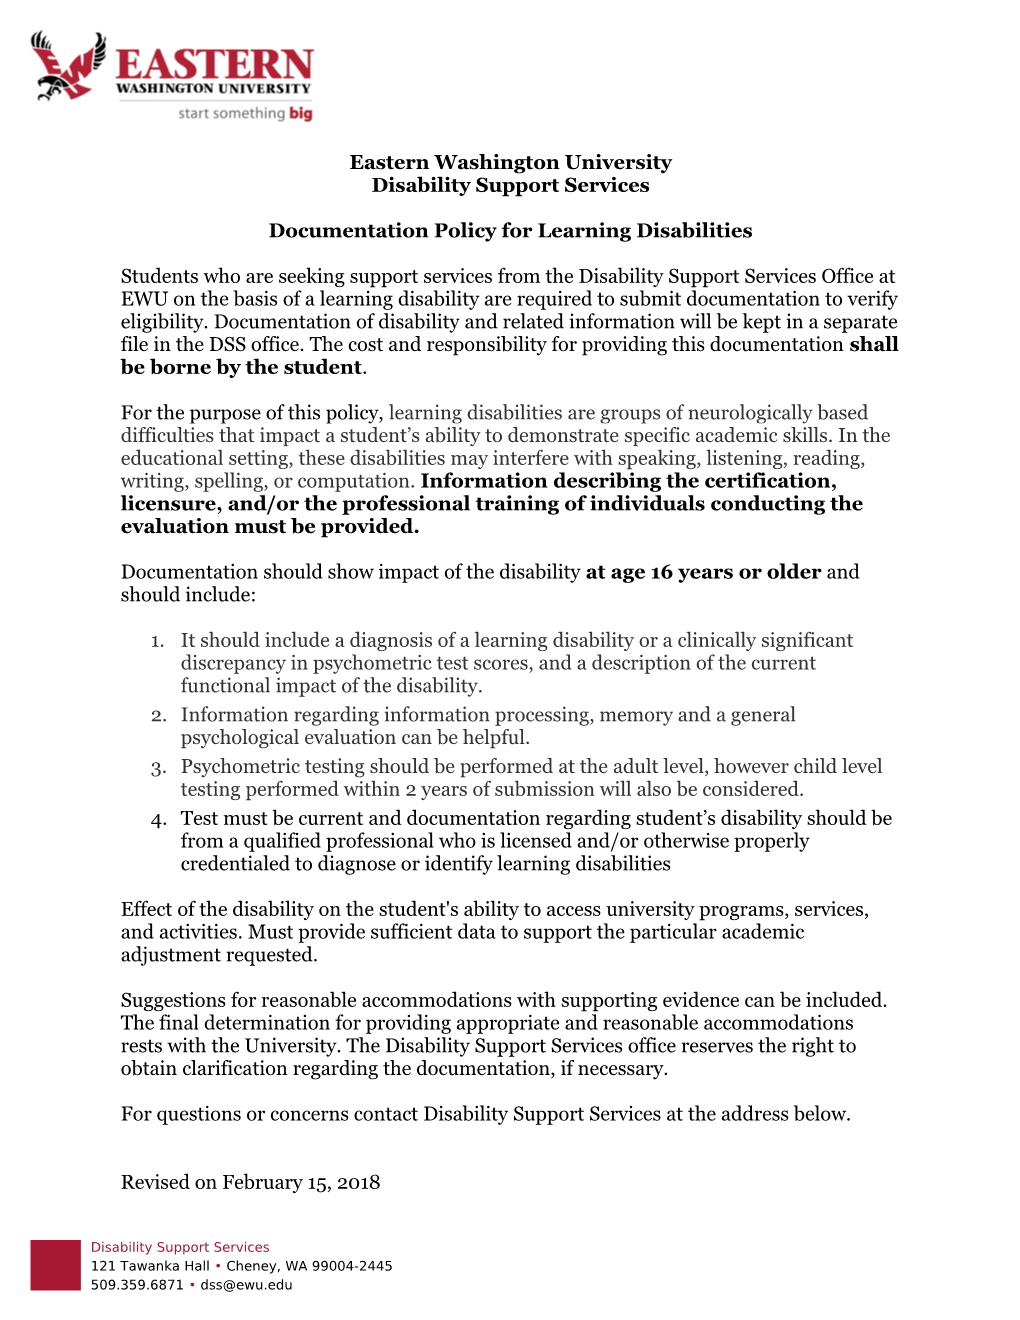 Documentation Policy for Learning Disabilities